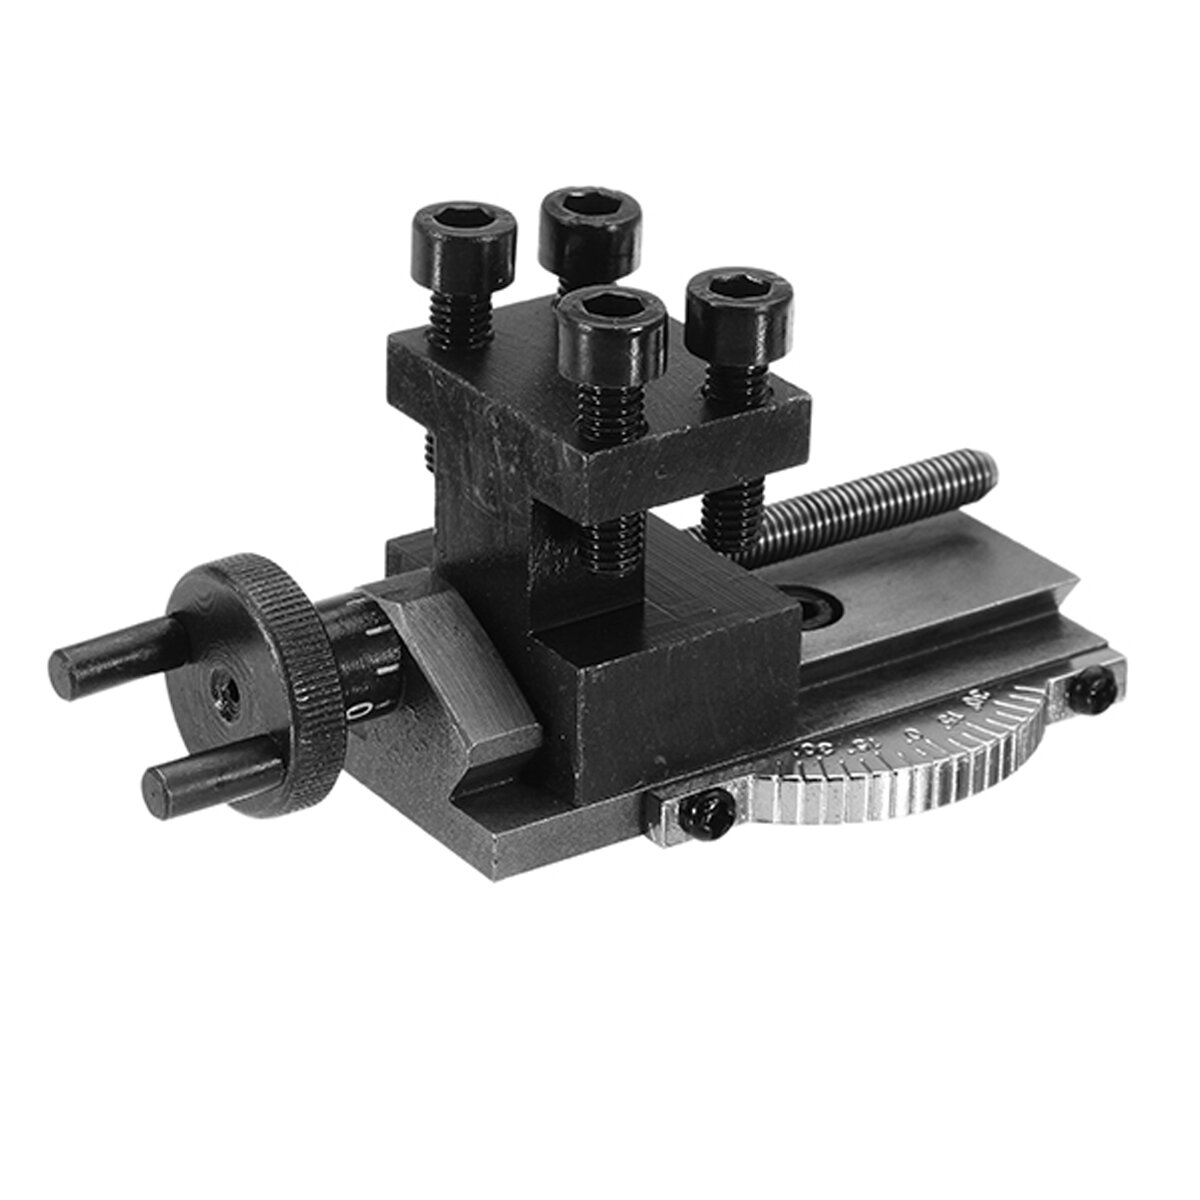 ZH-Wang Lathe Accessories Rotatable Lathe Tool Holder Mini Lathe Accessory Lathe Accessories 